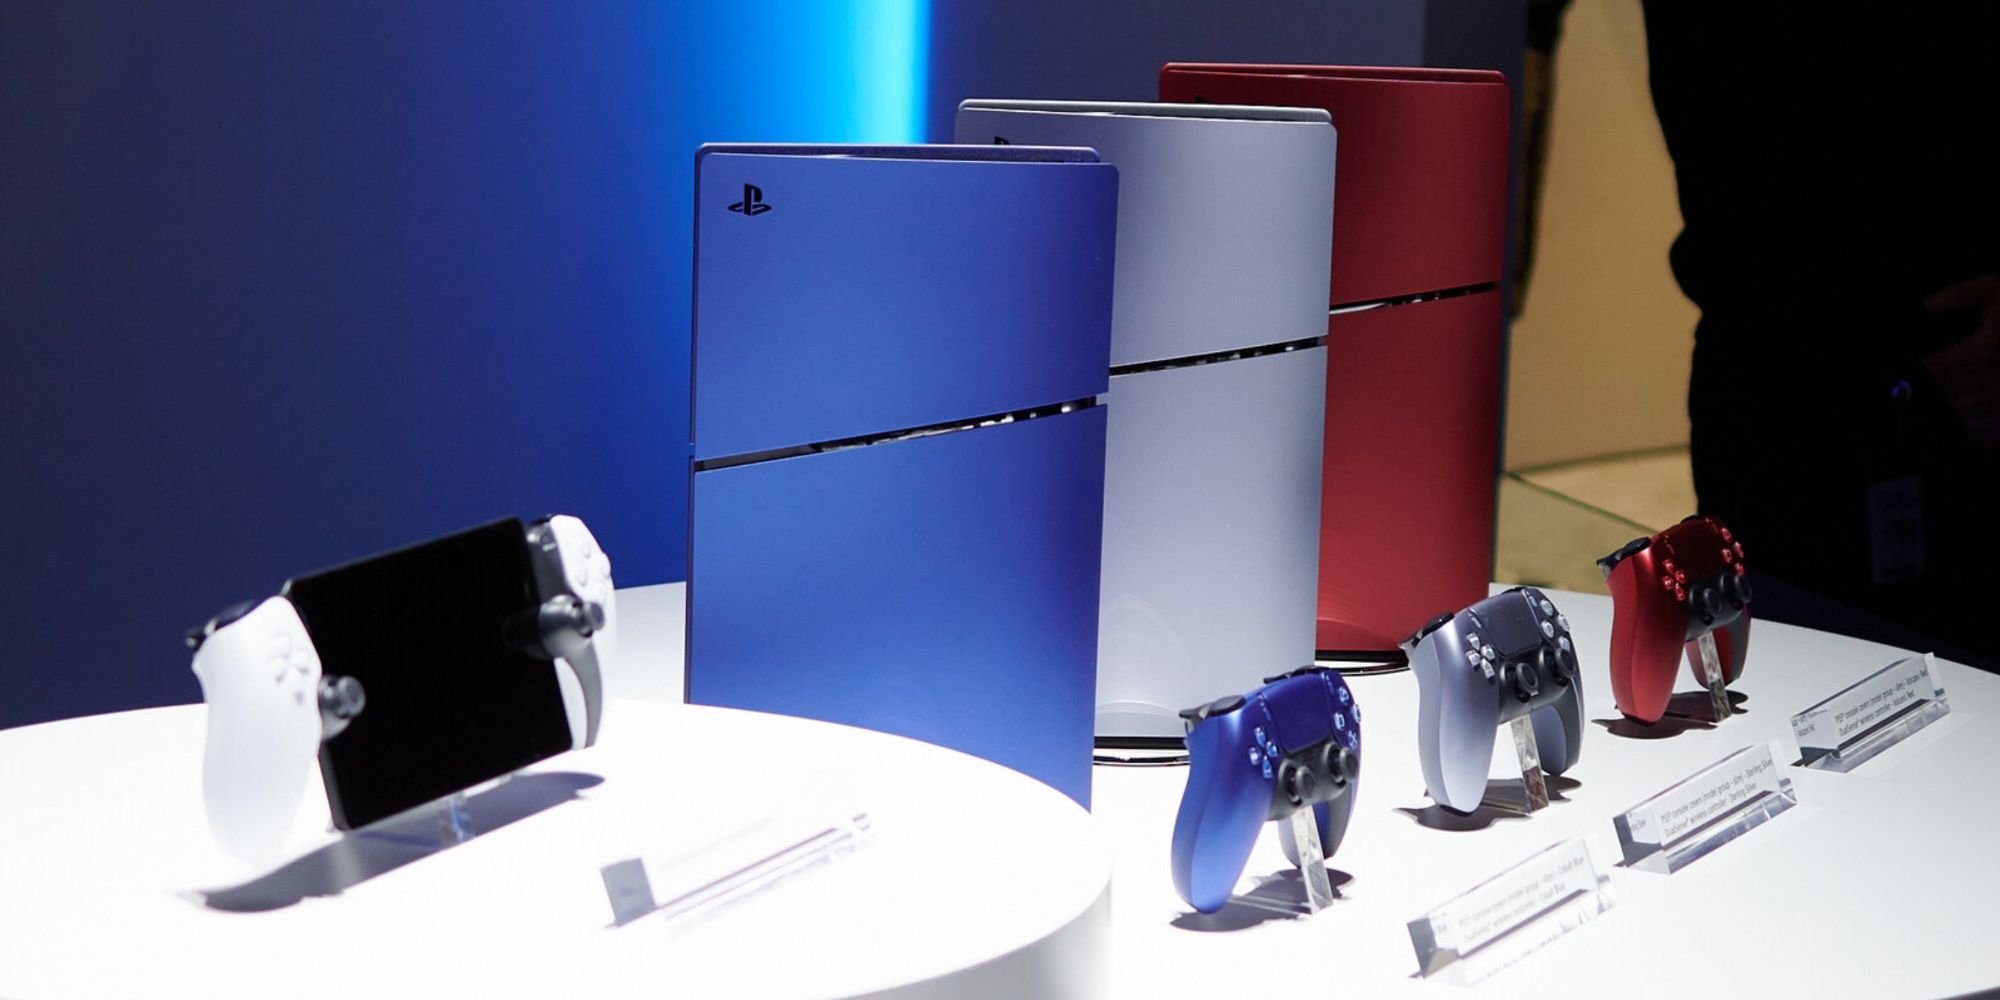 deep earth covers on the slim ps5 and matching dualsense